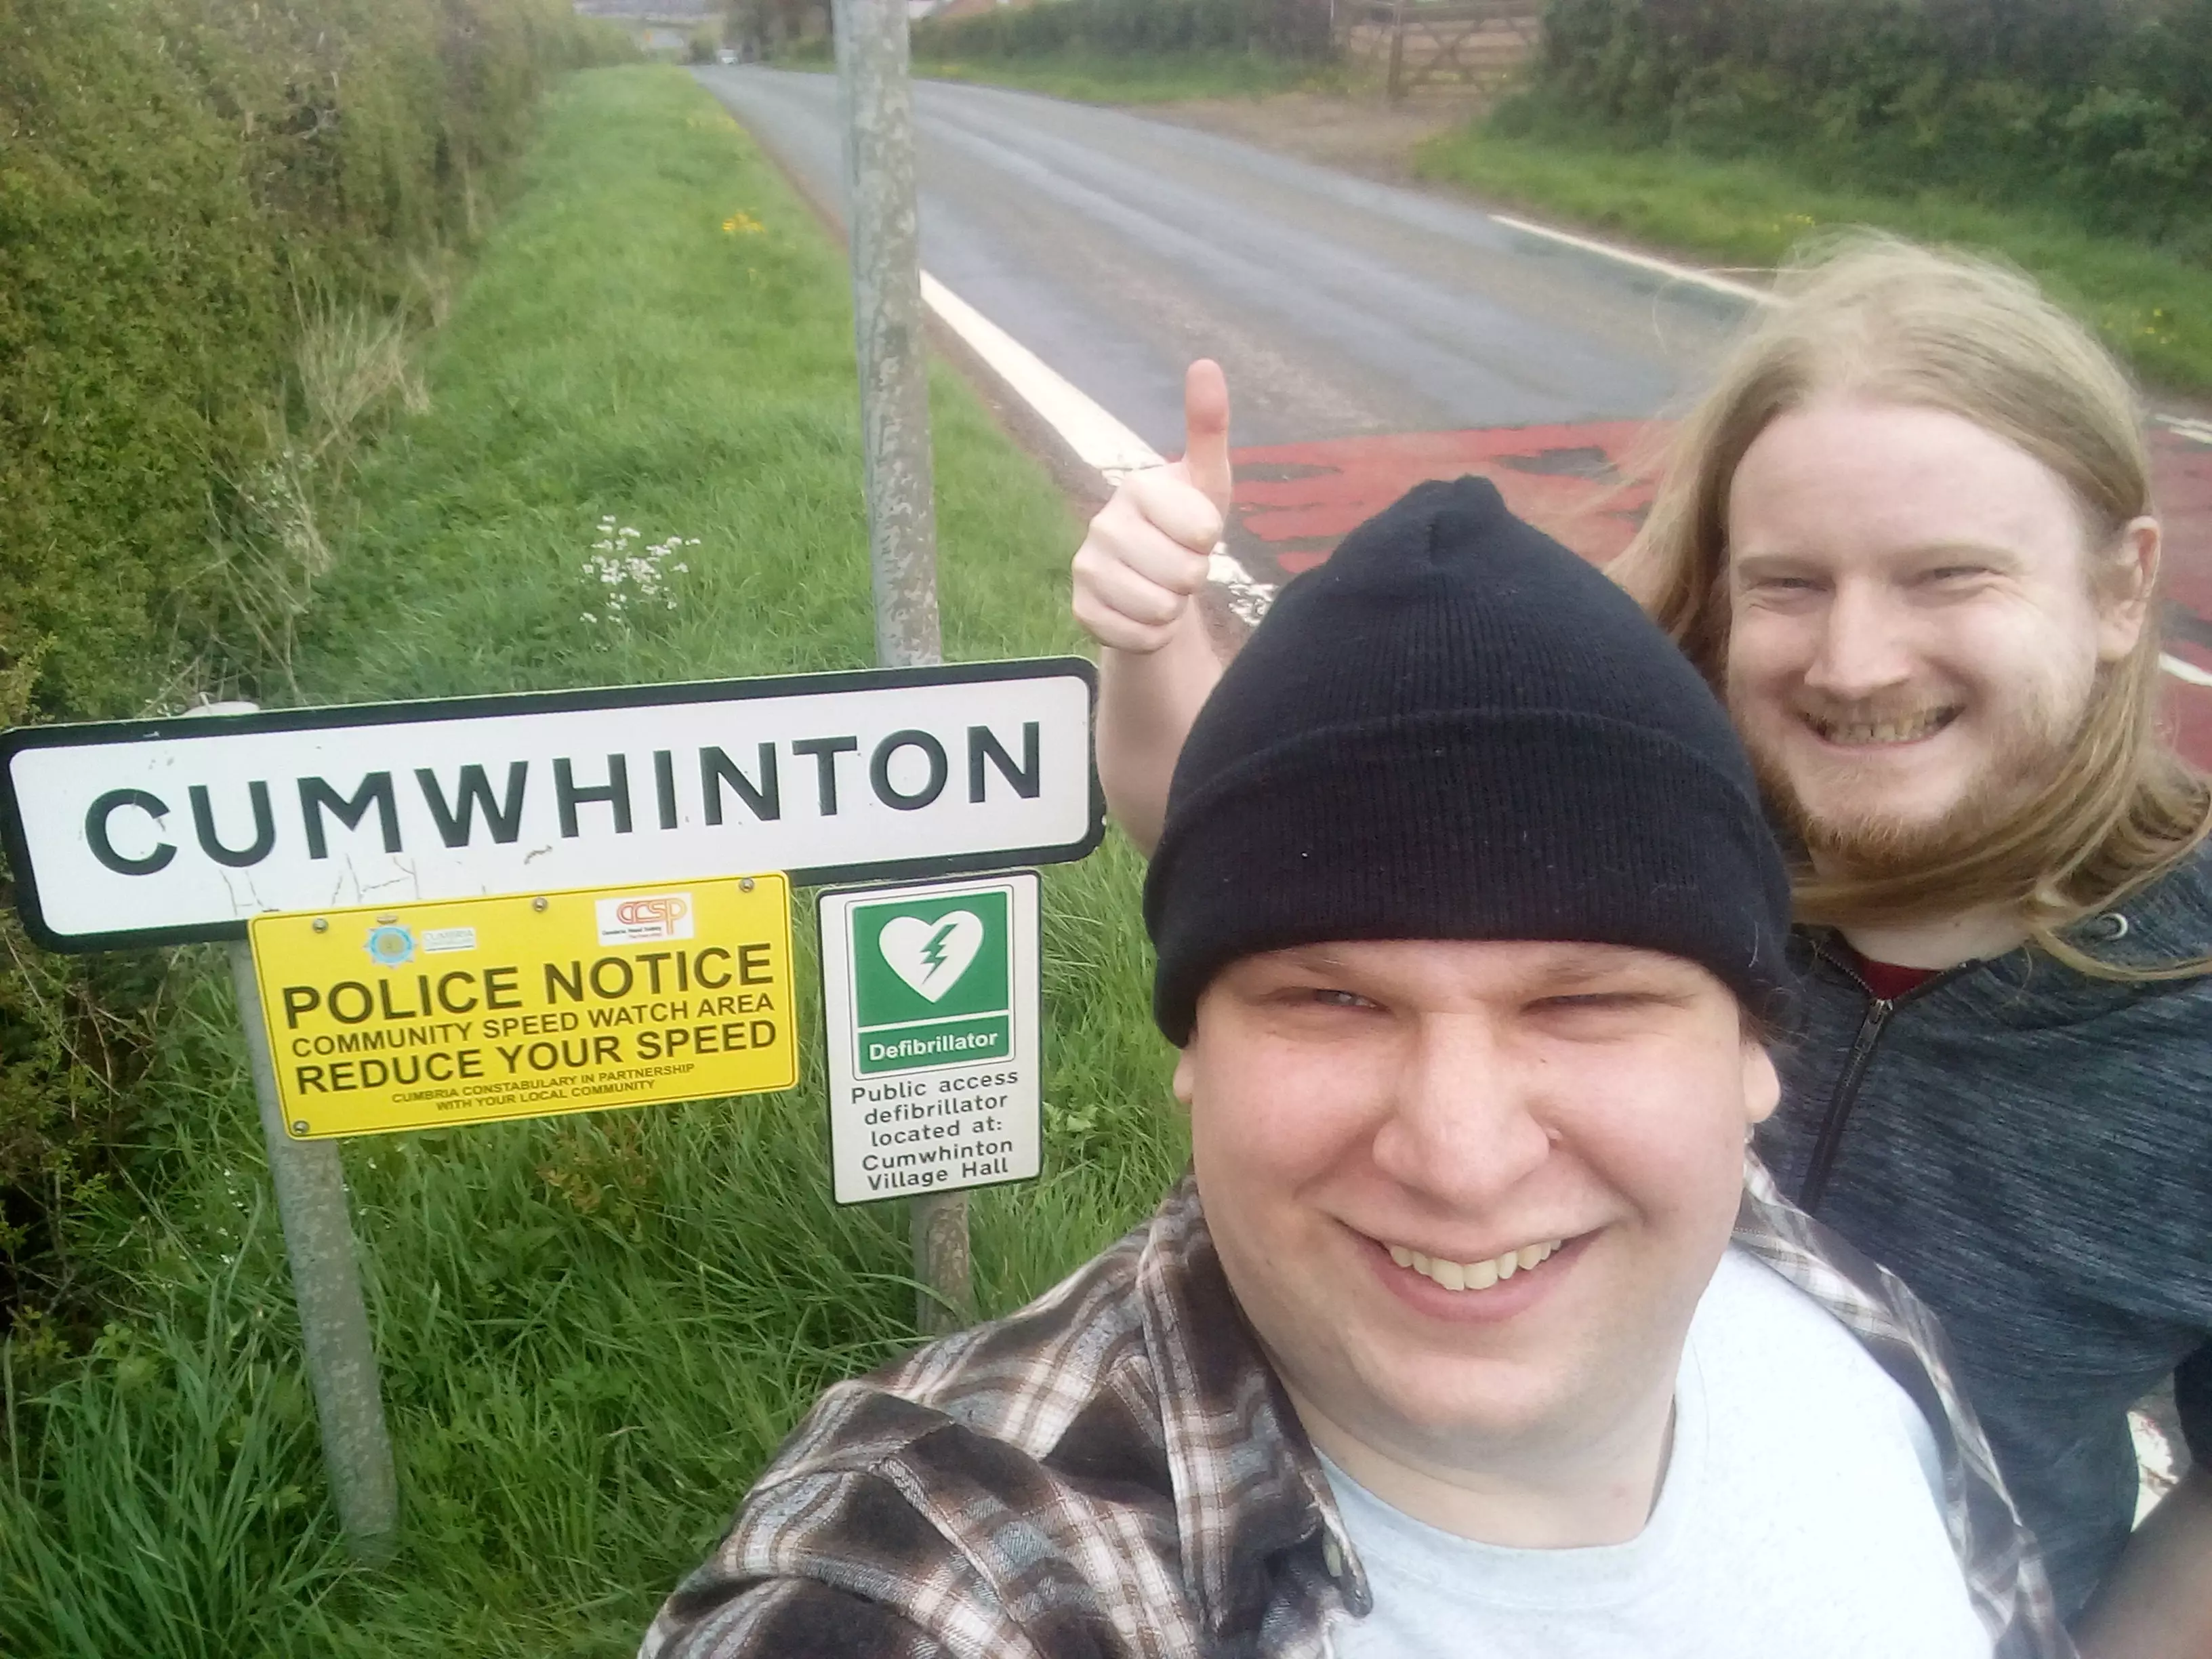 They took selfies with the rude place names.